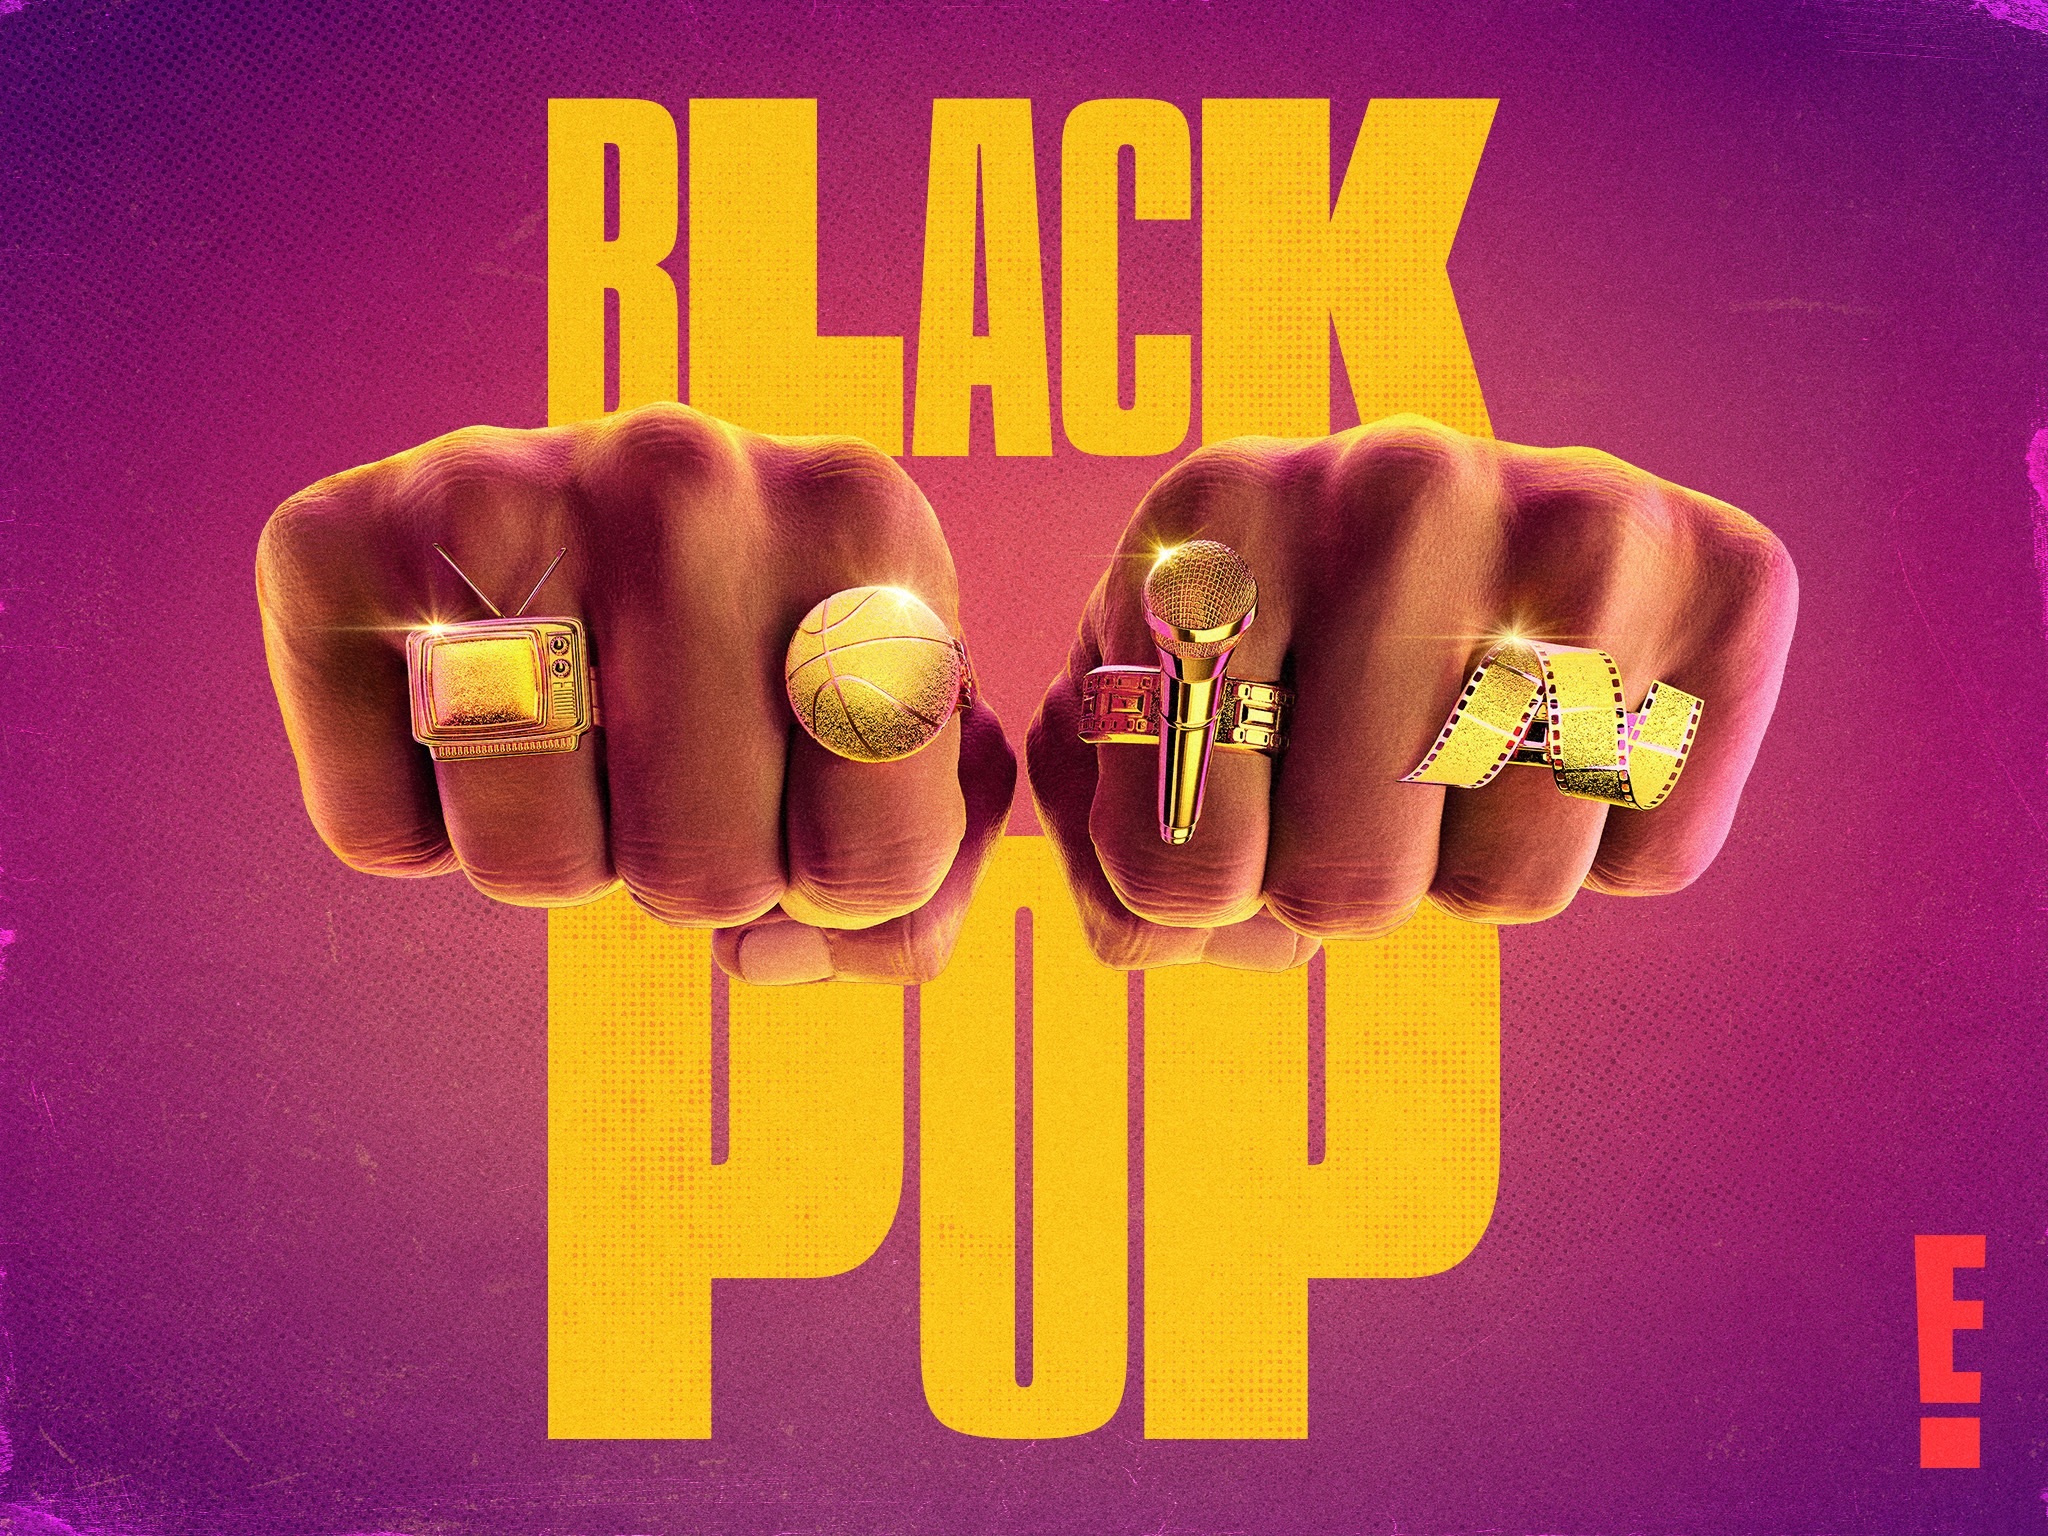 E! Entertainment to bring black excellence to the small screen with new series Black Pop